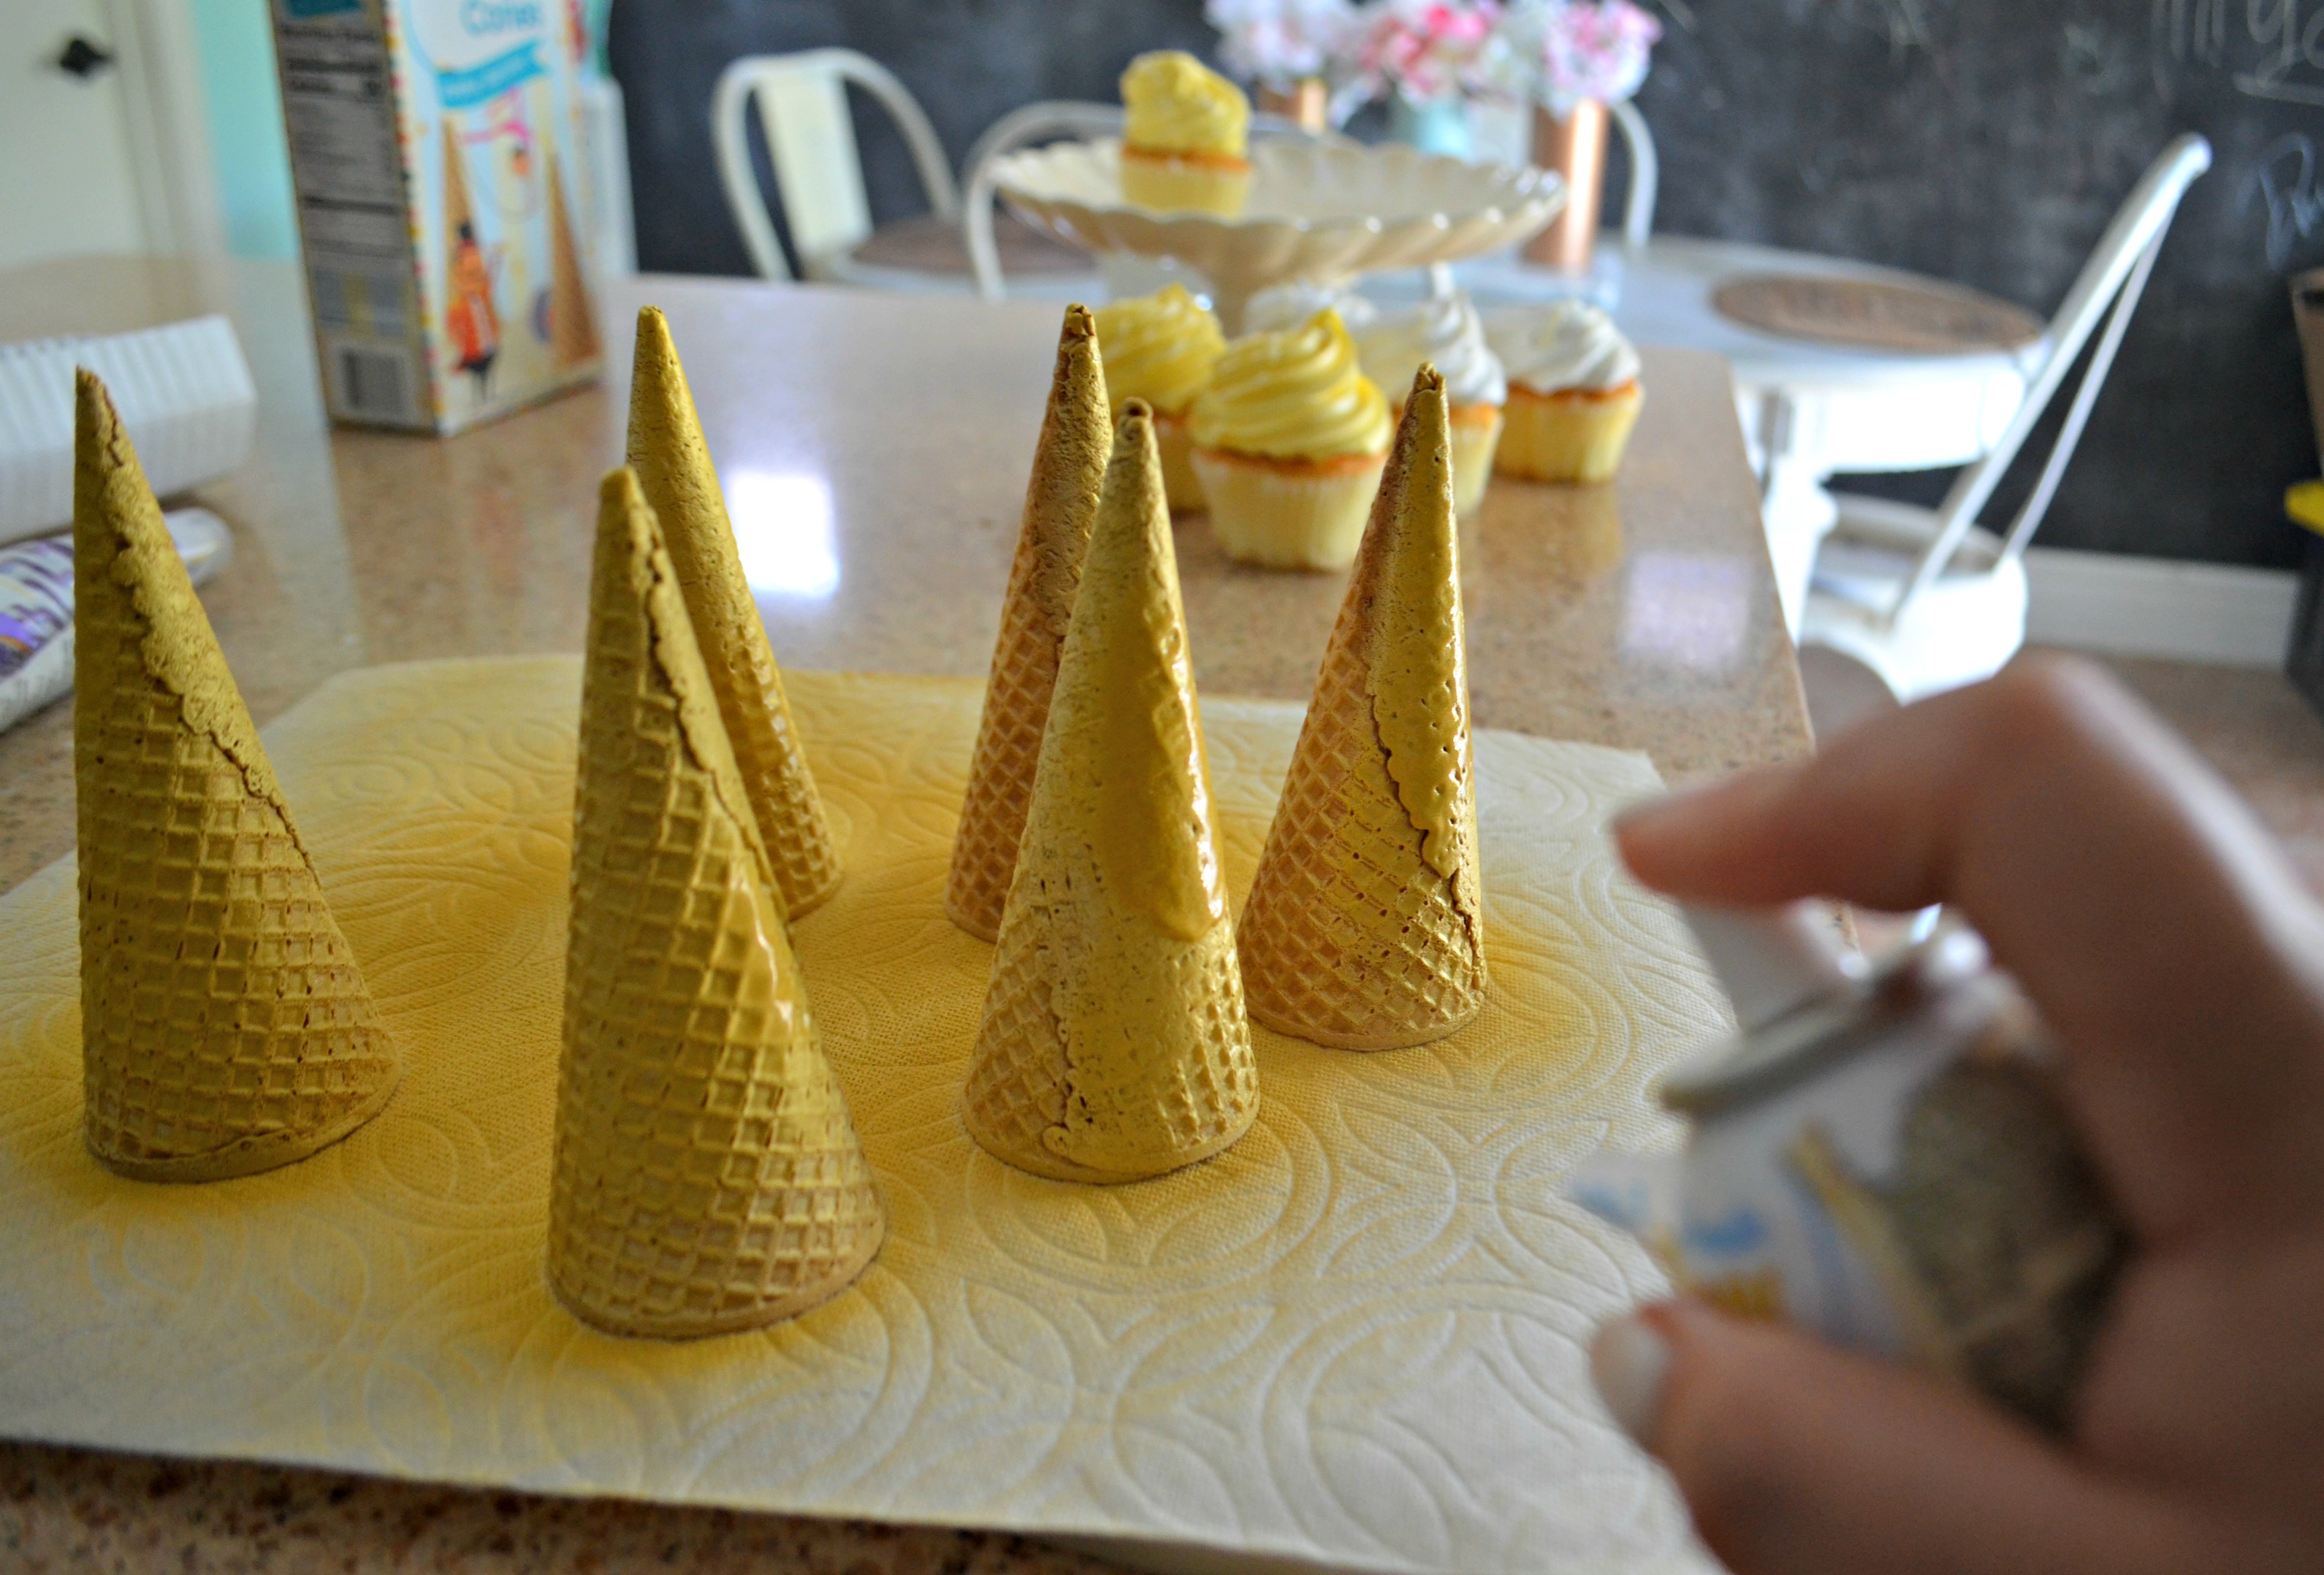 ice cream cones with metallic edible spray on counter with cupcakes in background